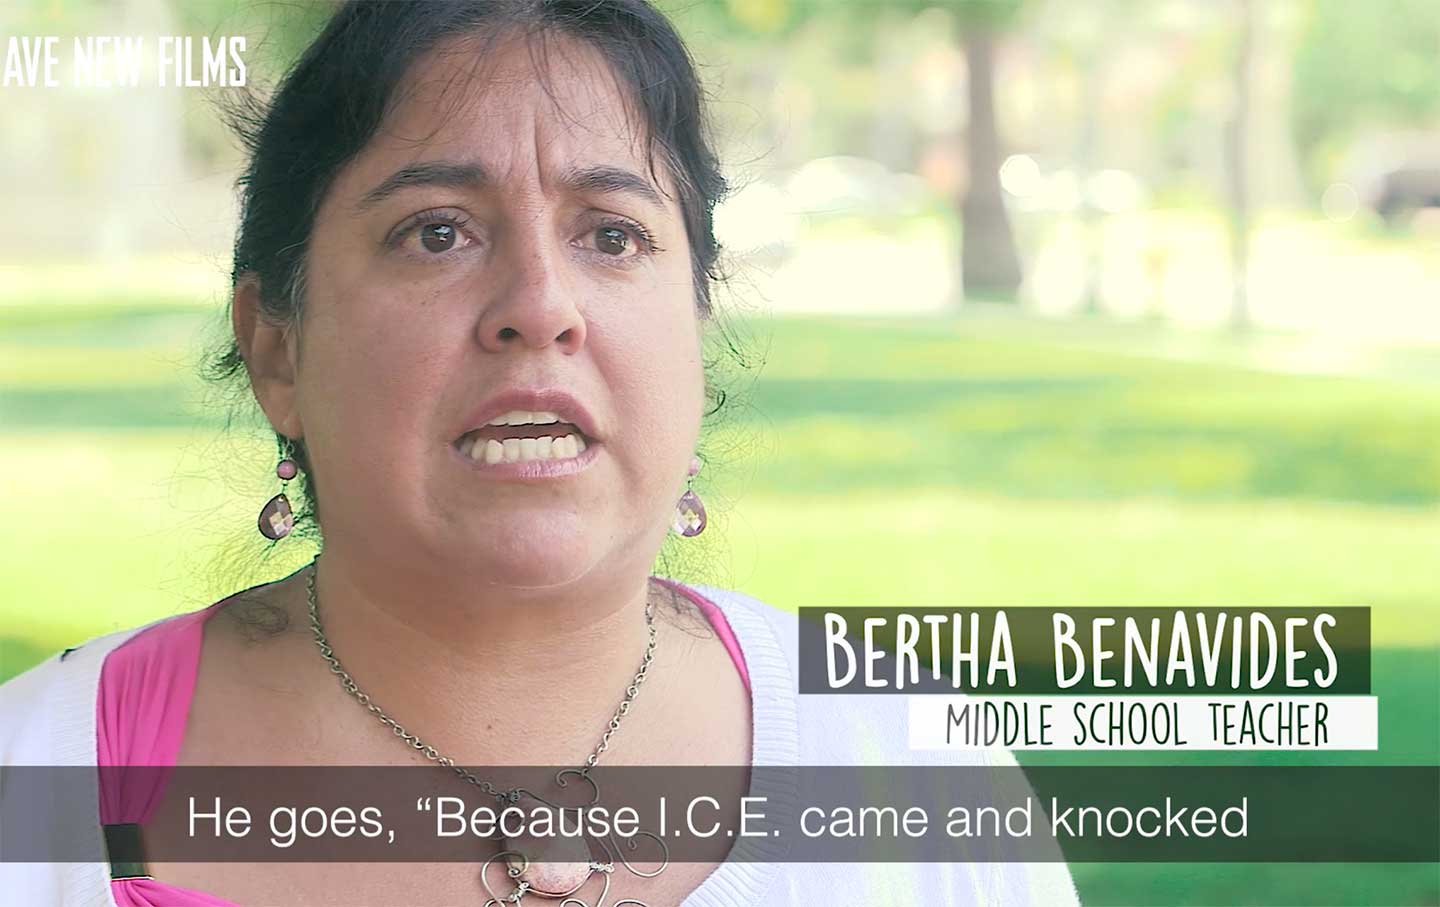 Teachers Are Witnessing an Uptick in Emotional Problems in Students Afraid of ICE